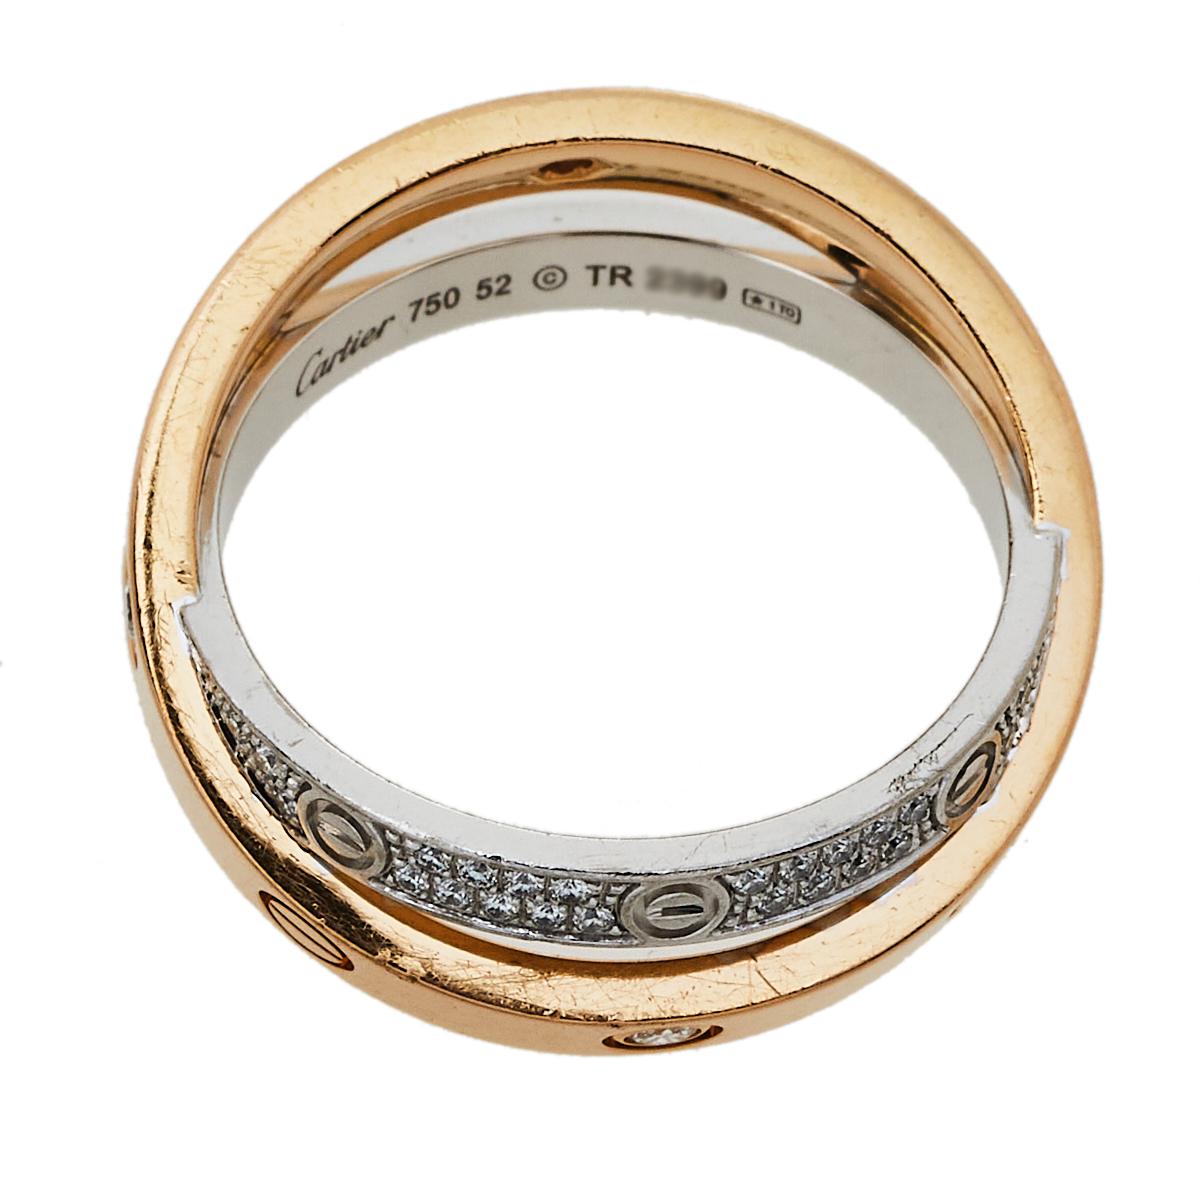 The 'Love' collection from Cartier is a timeless tribute to the feeling of love. Celebrating that everlasting bond of love, this ring comes crafted from 18k yellow gold and white gold and exhibits two conjoined bands that are detailed with the